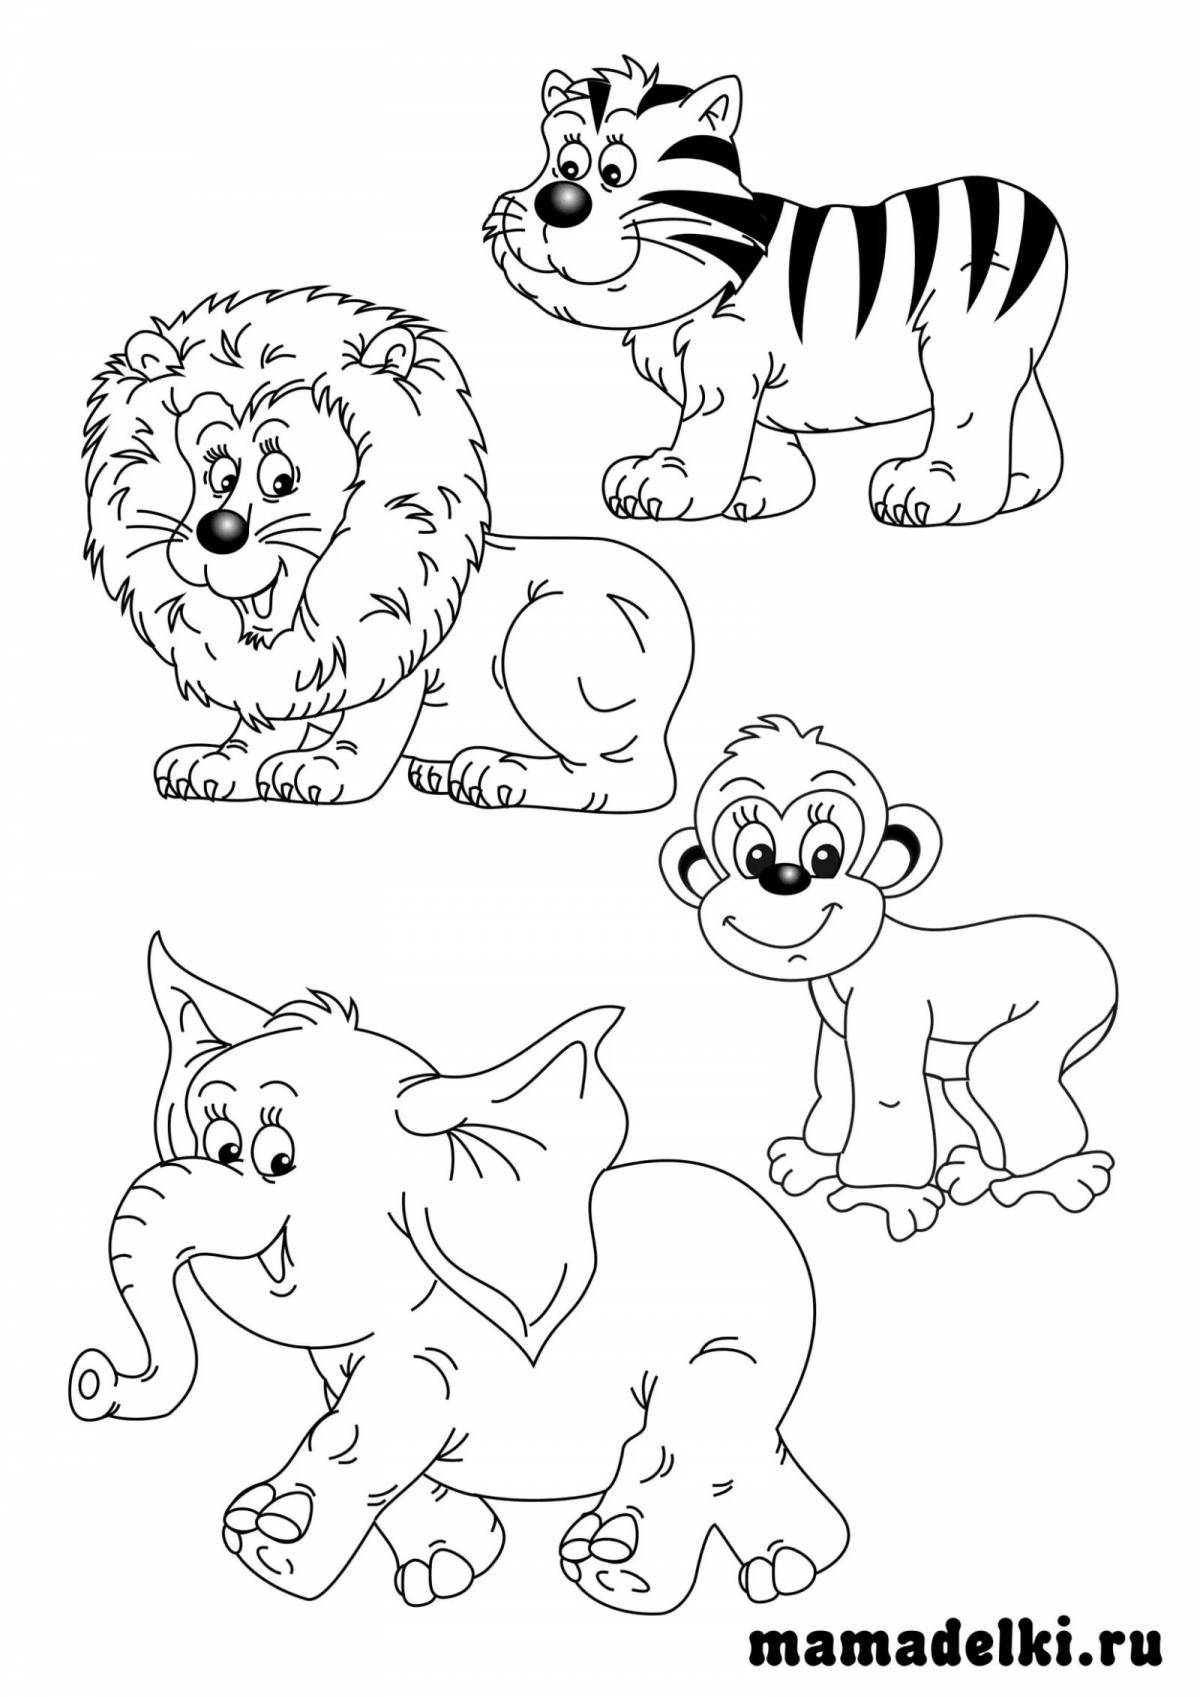 Fun coloring book of wild animals for 5 year olds